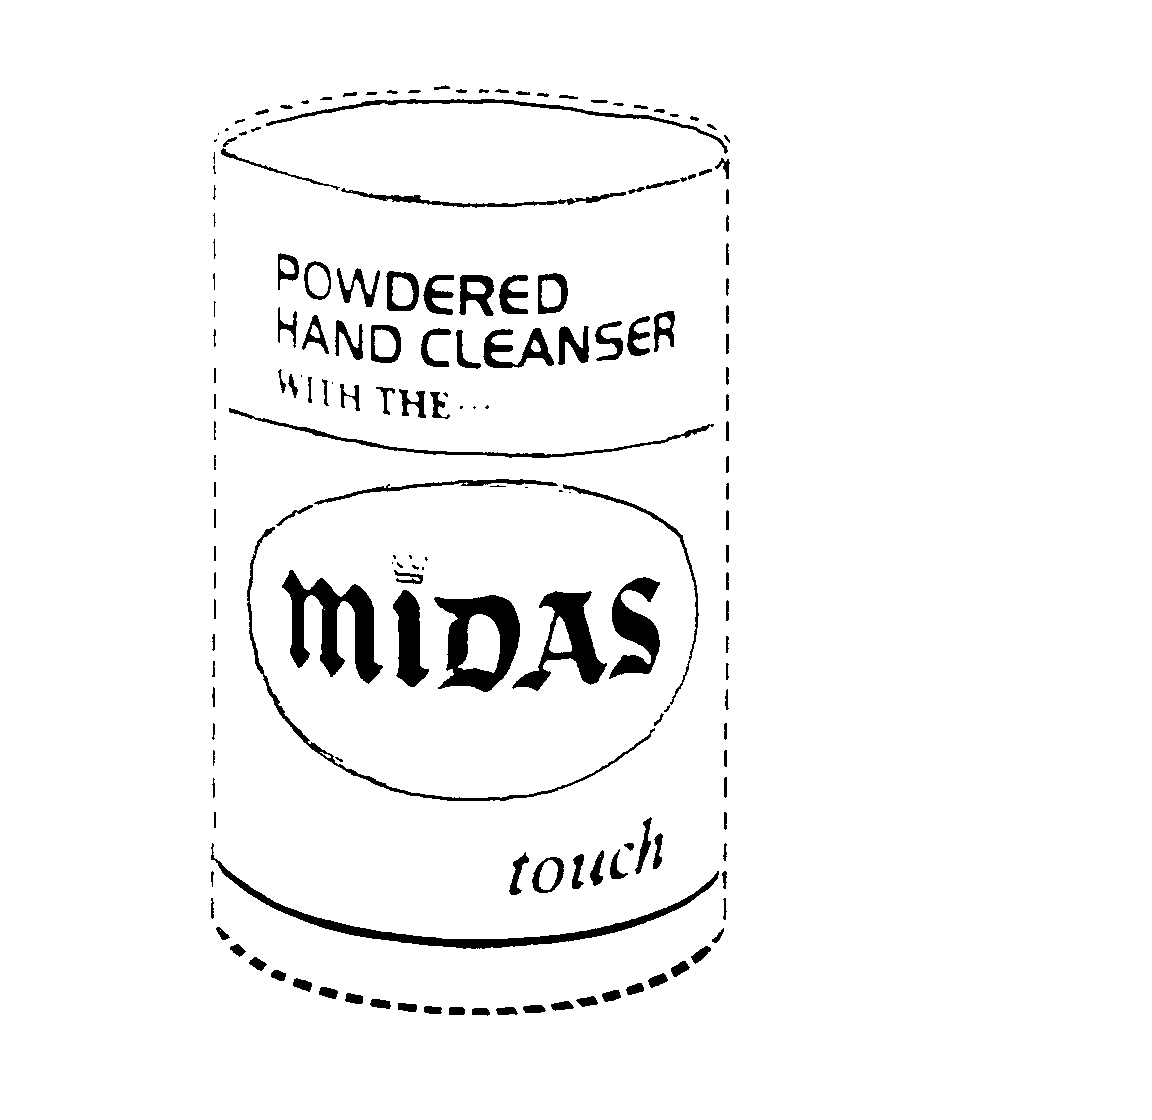  POWDERED HAND CLEANSER WITH THE... MIDAS TOUCH